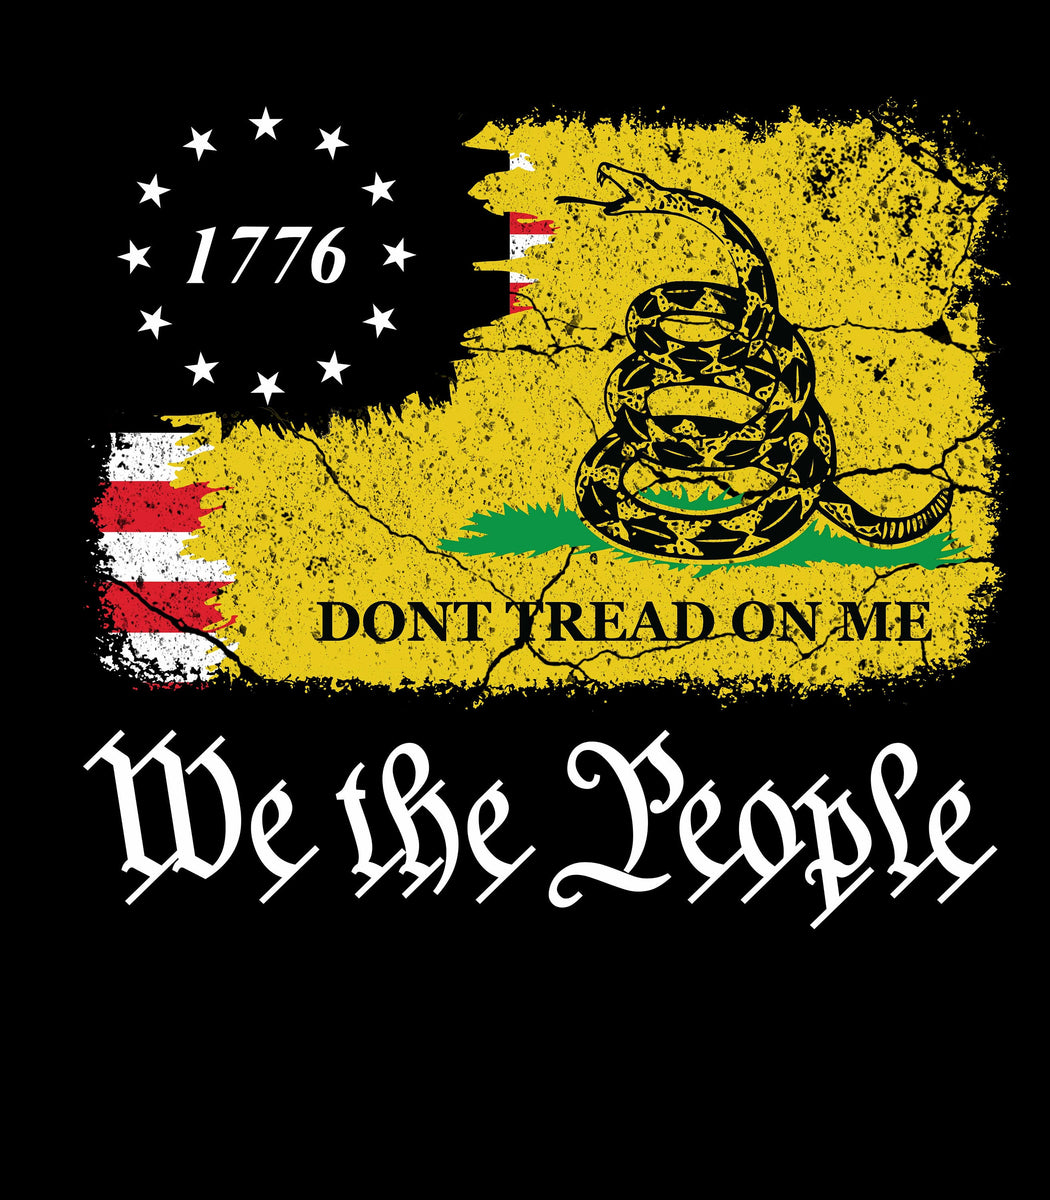 We The People Holsters - 1776 B Ross Flag - Short Sleeve